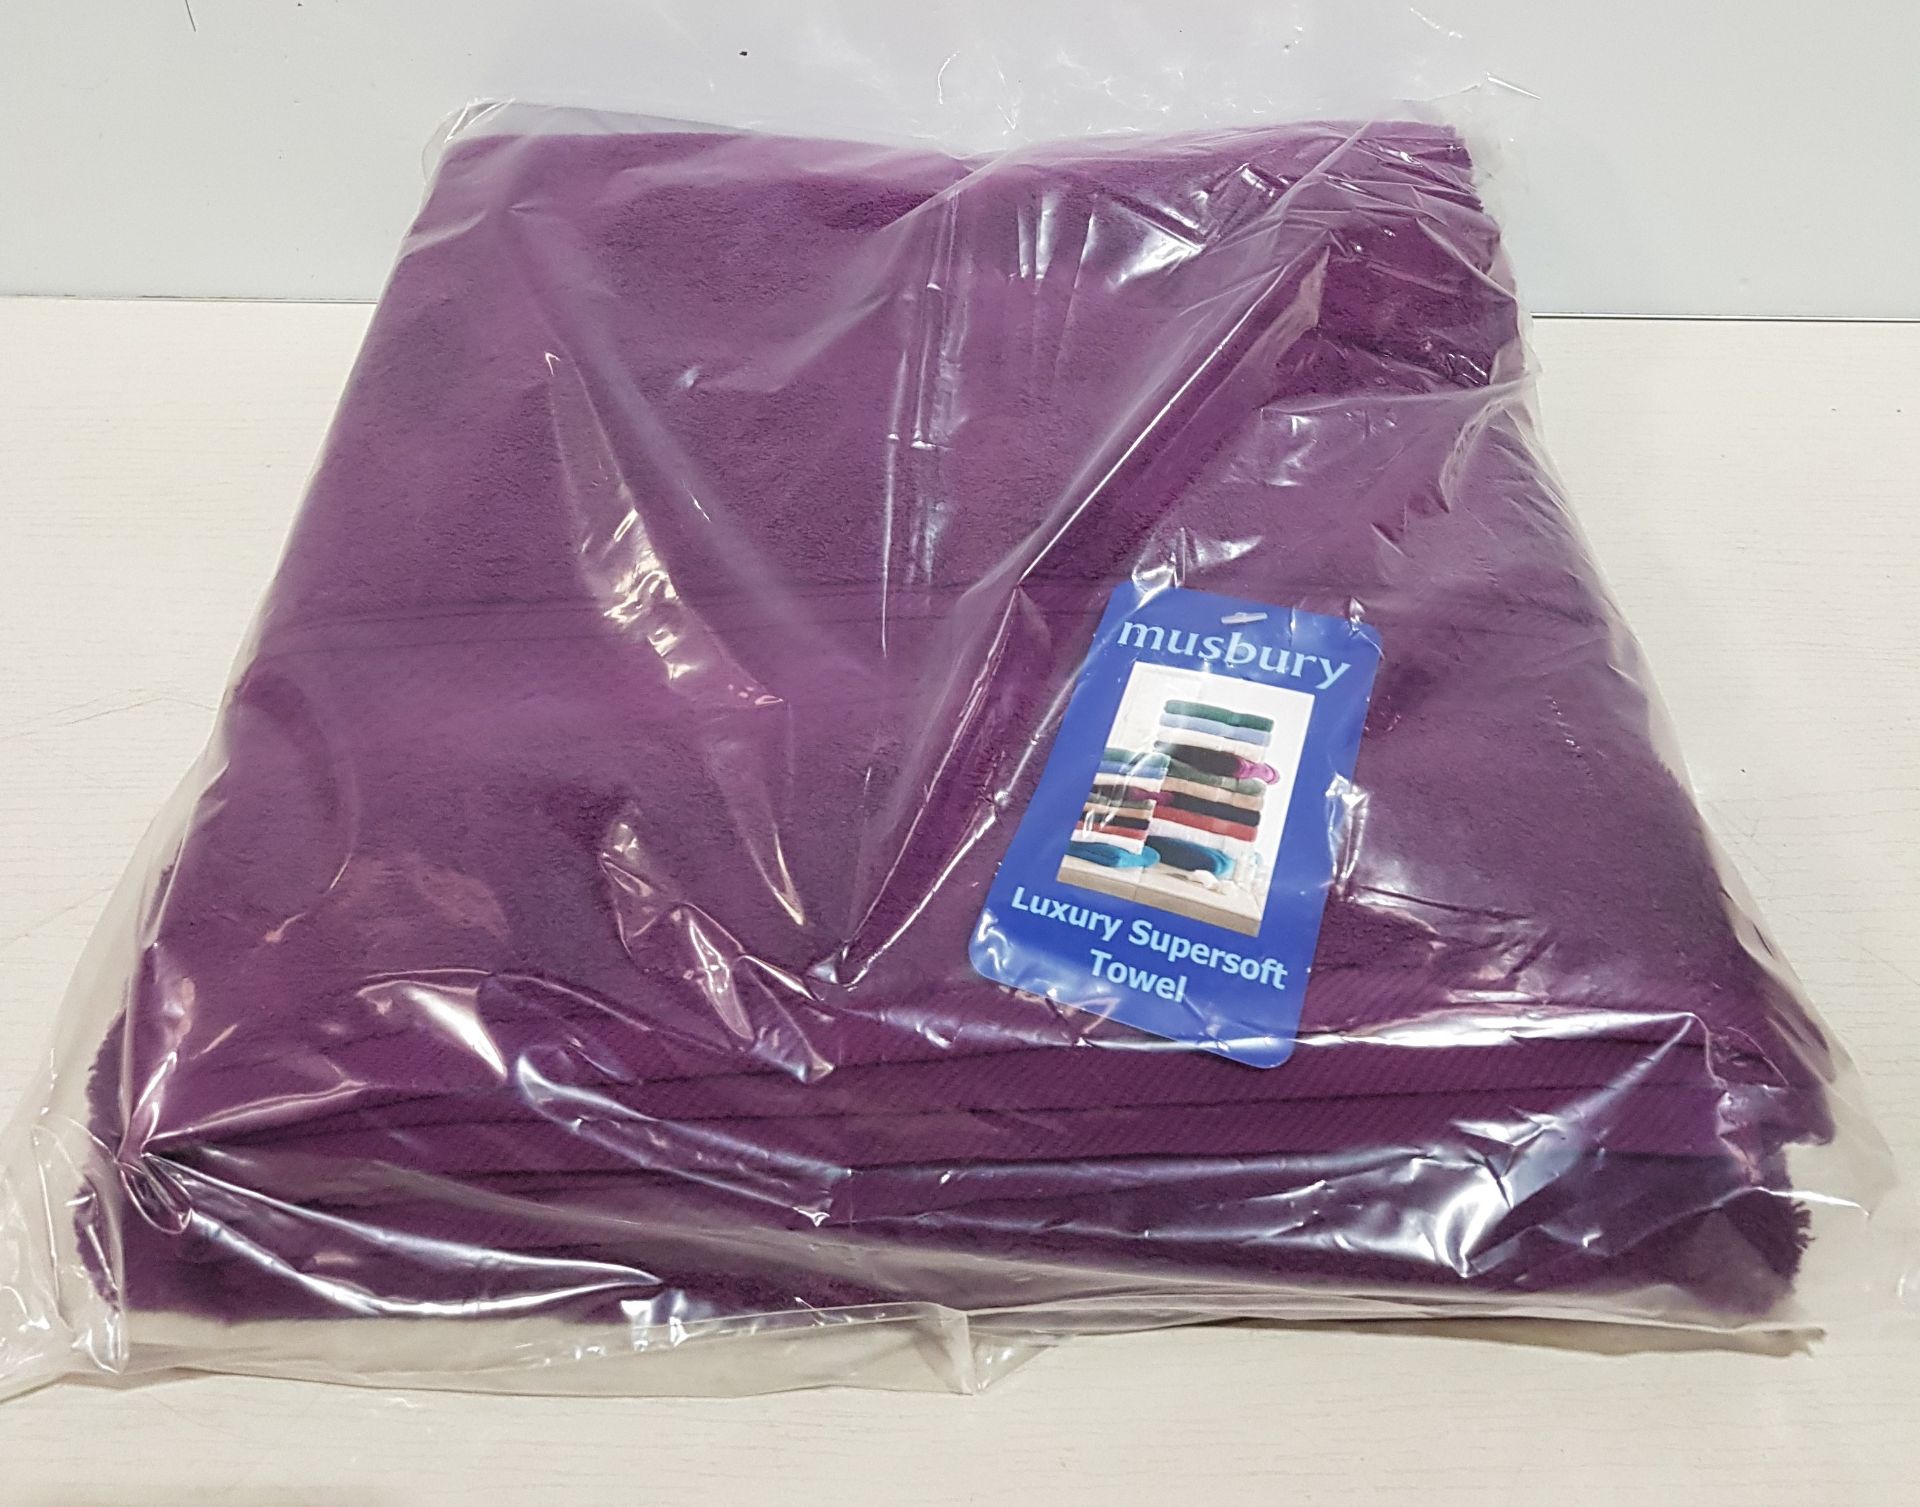 20 X BRAND NEW MUSBURY LUXURY SUPERSOFT TOWELS - ALL IN PURPLE GRAPE - ( 100 X 150 CM ) - IN 2